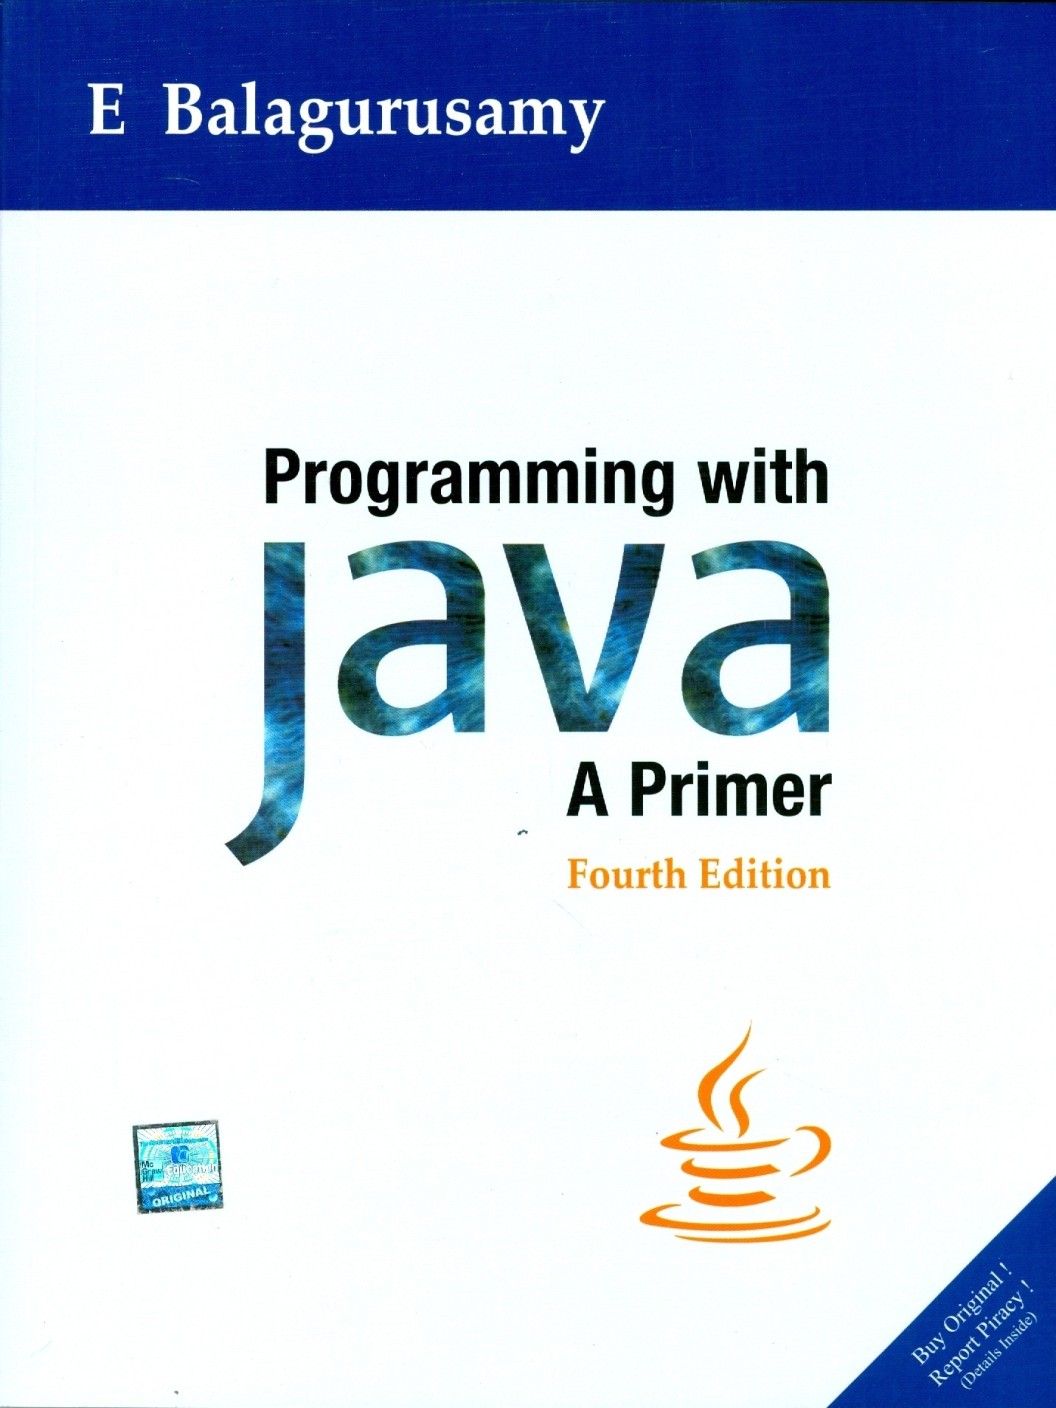 Programming With Java : A Primer 4th Ed by E Balagurusamy|Author